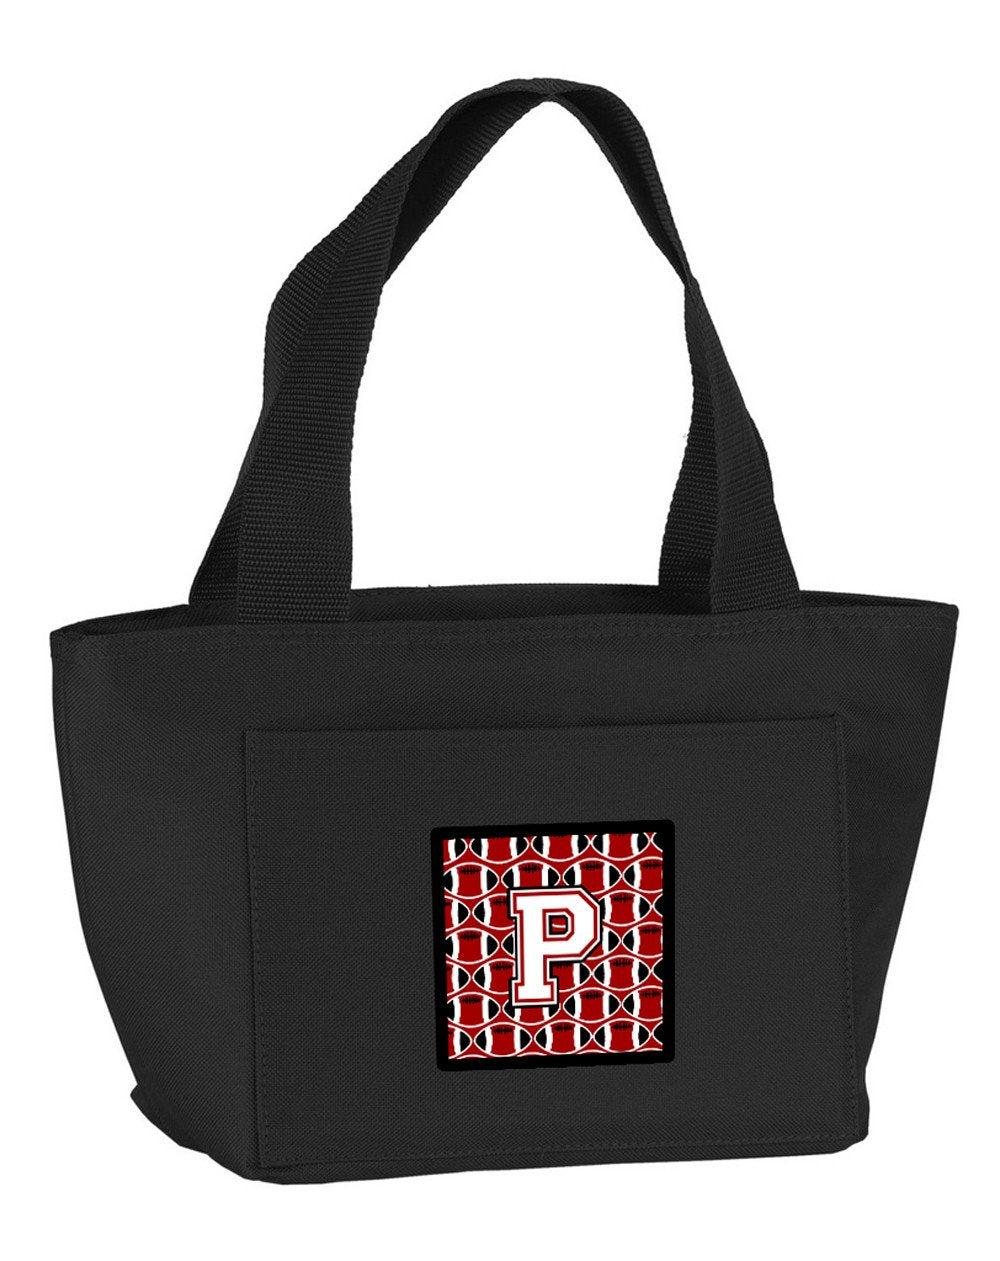 Letter P Football Cardinal and White Lunch Bag CJ1082-PBK-8808 by Caroline's Treasures